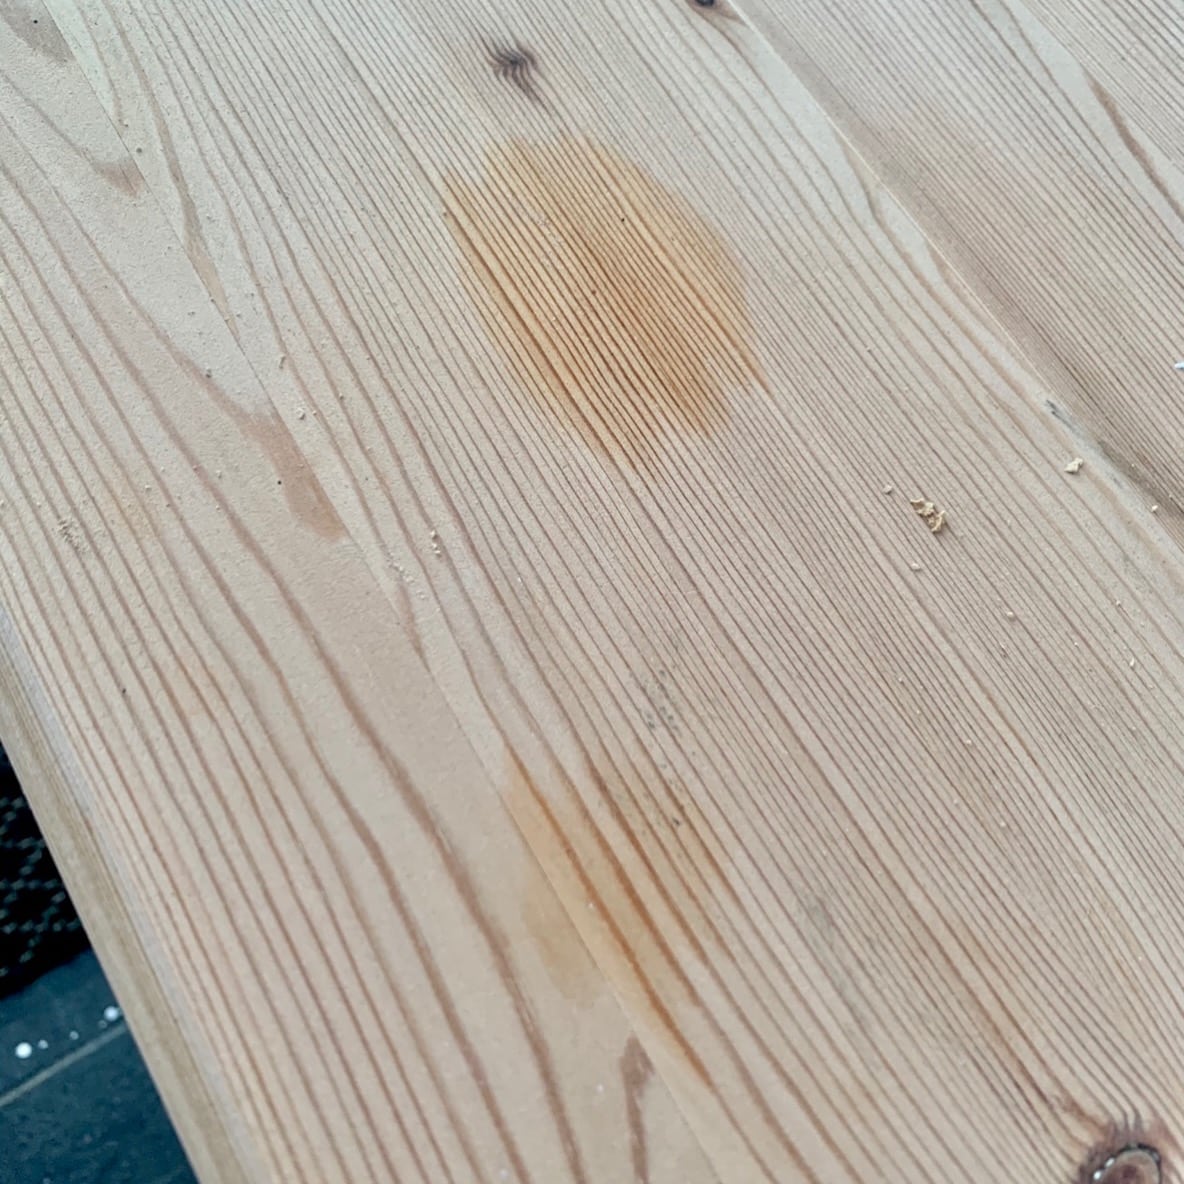 Three ways to prepare low quality wood before using stain